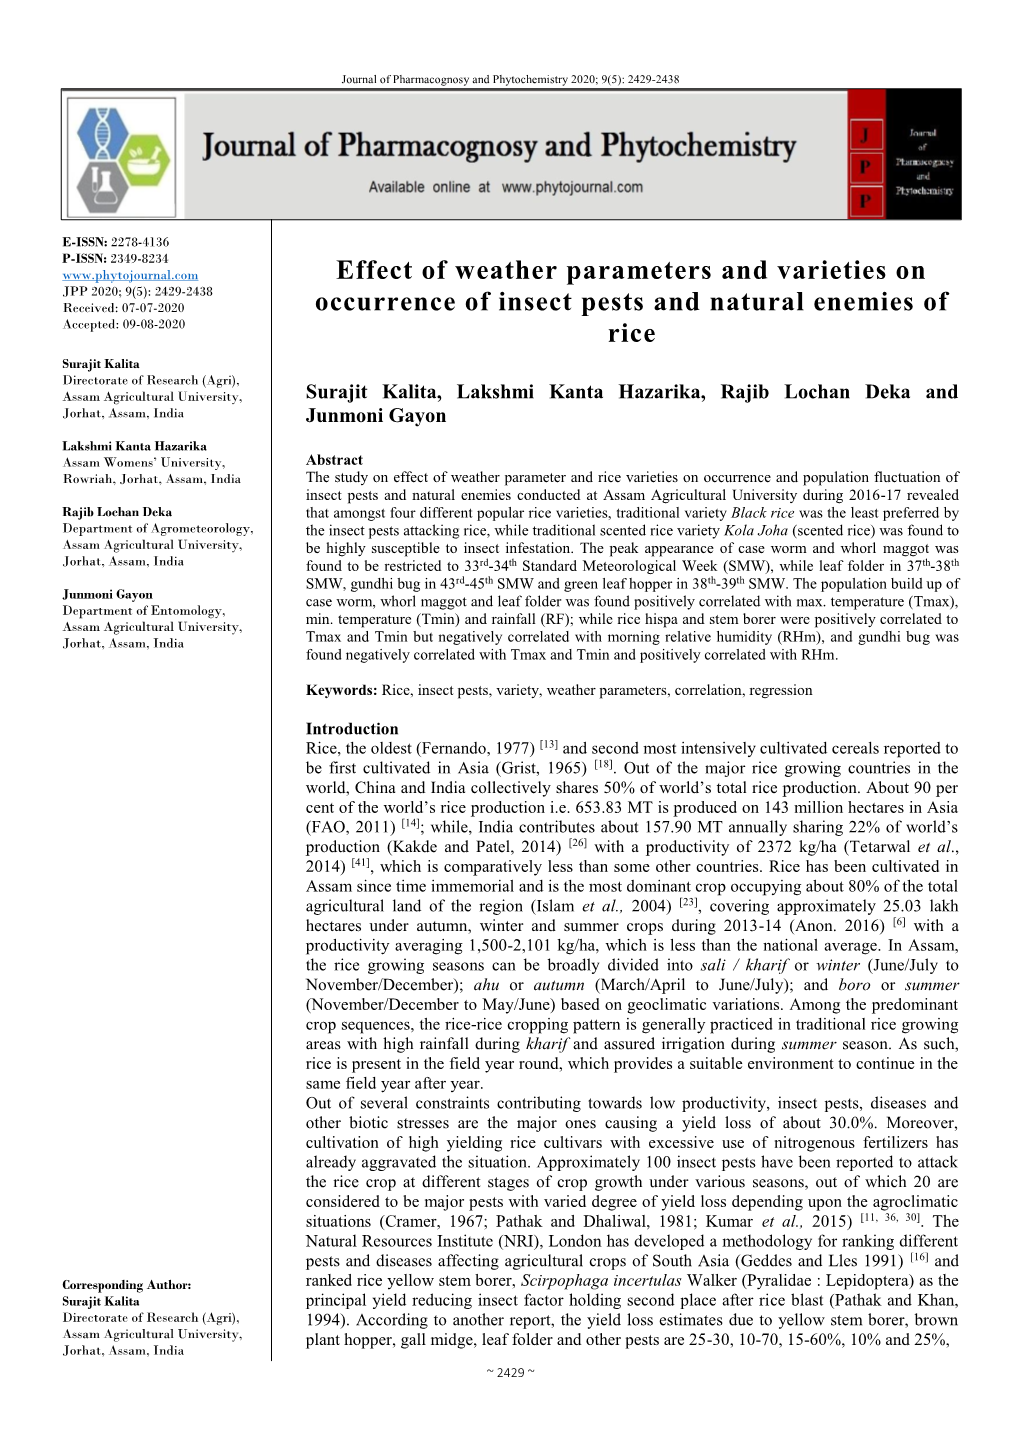 Effect of Weather Parameters and Varieties on Occurrence of Insect Pests and Natural Enemies of Rice